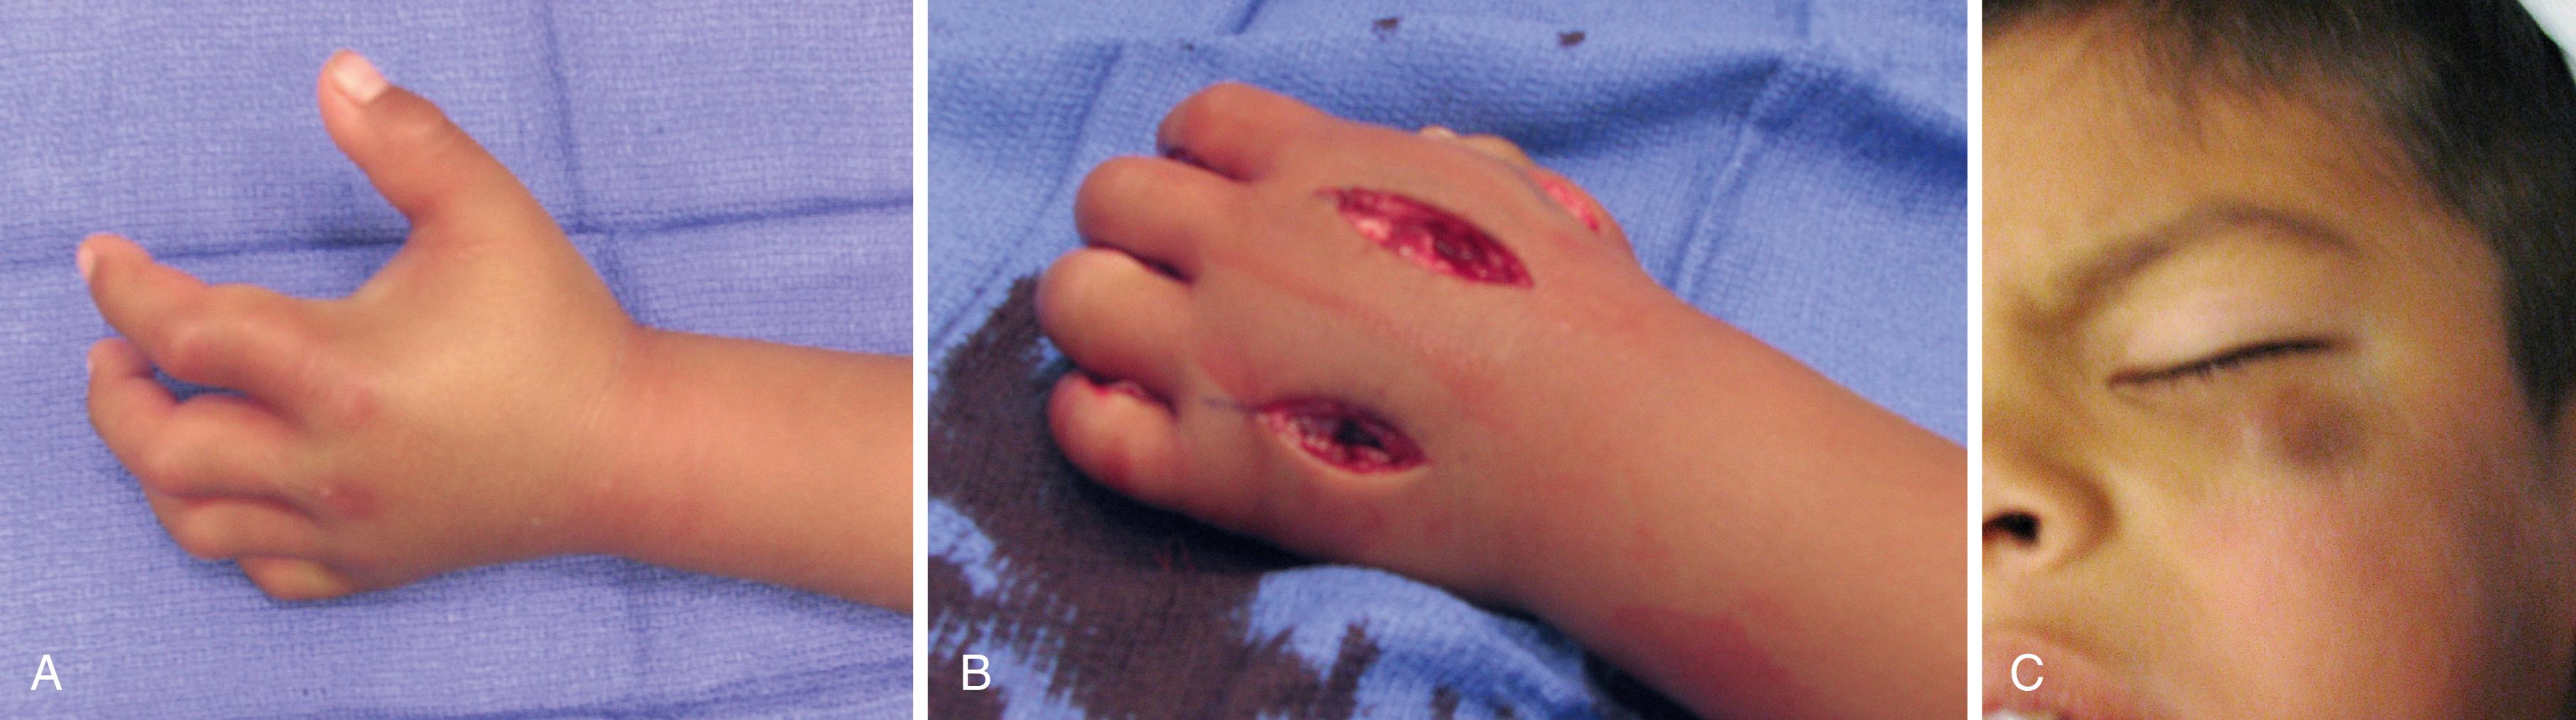 Fig. 51.2, This 4-year-old presented with hand and forearm swelling after minor trauma. Other areas of bruising were noted. After workup, the child was found to have hemophilia A. He underwent fasciotomy of his hand and forearm. A, Swelling of the hand and forearm. B, After dorsal fasciotomy of the hand and volar extended carpal tunnel release and forearm fasciotomy. C, Bruising of the periorbital region.